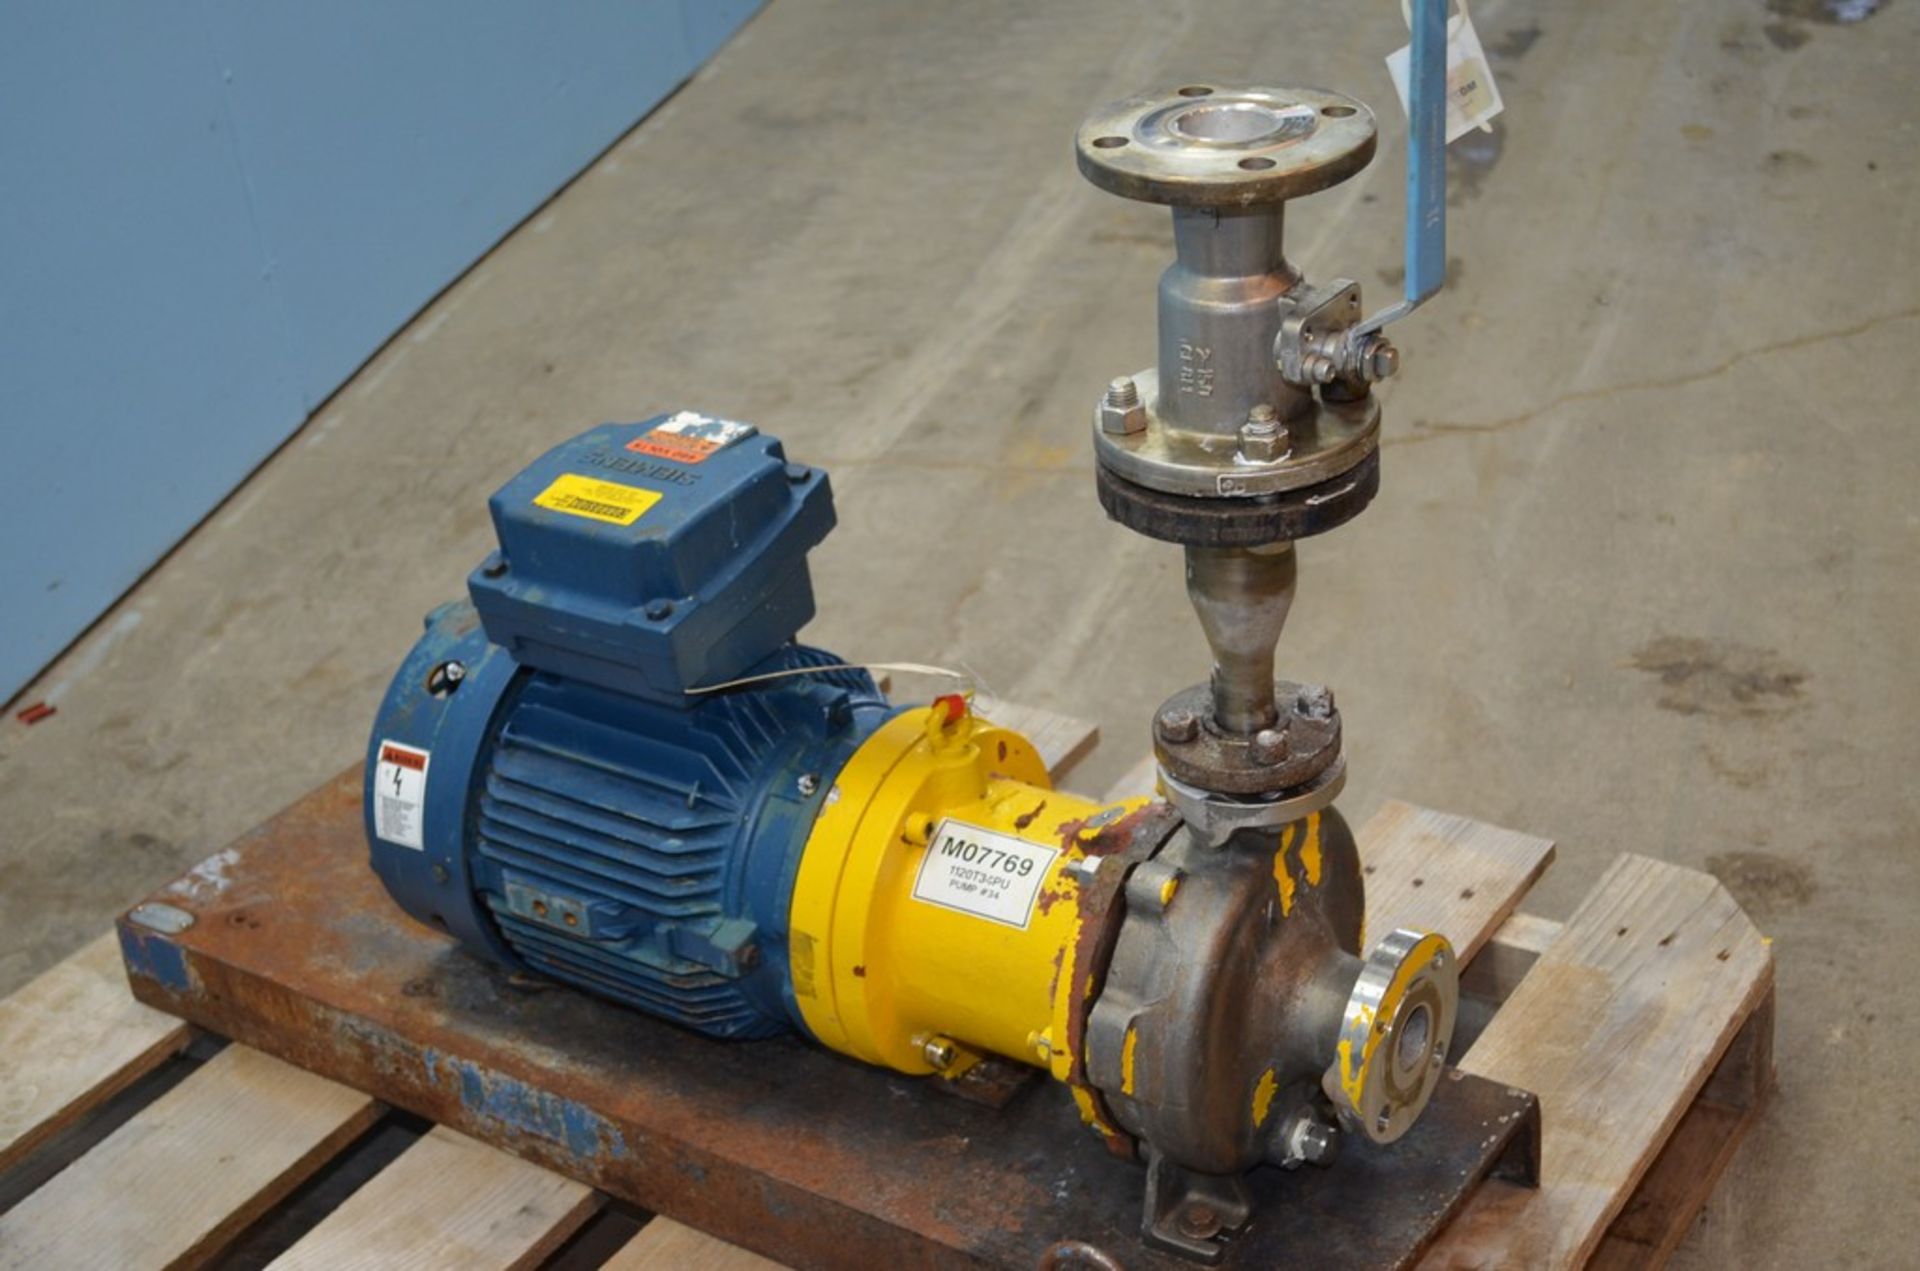 Kontro GSA 7.5 HP 316 S/S Centrifugal Pump. Size 1.5 x 1 x 6. Approximately 60 Gallons Per Minute at - Image 5 of 7